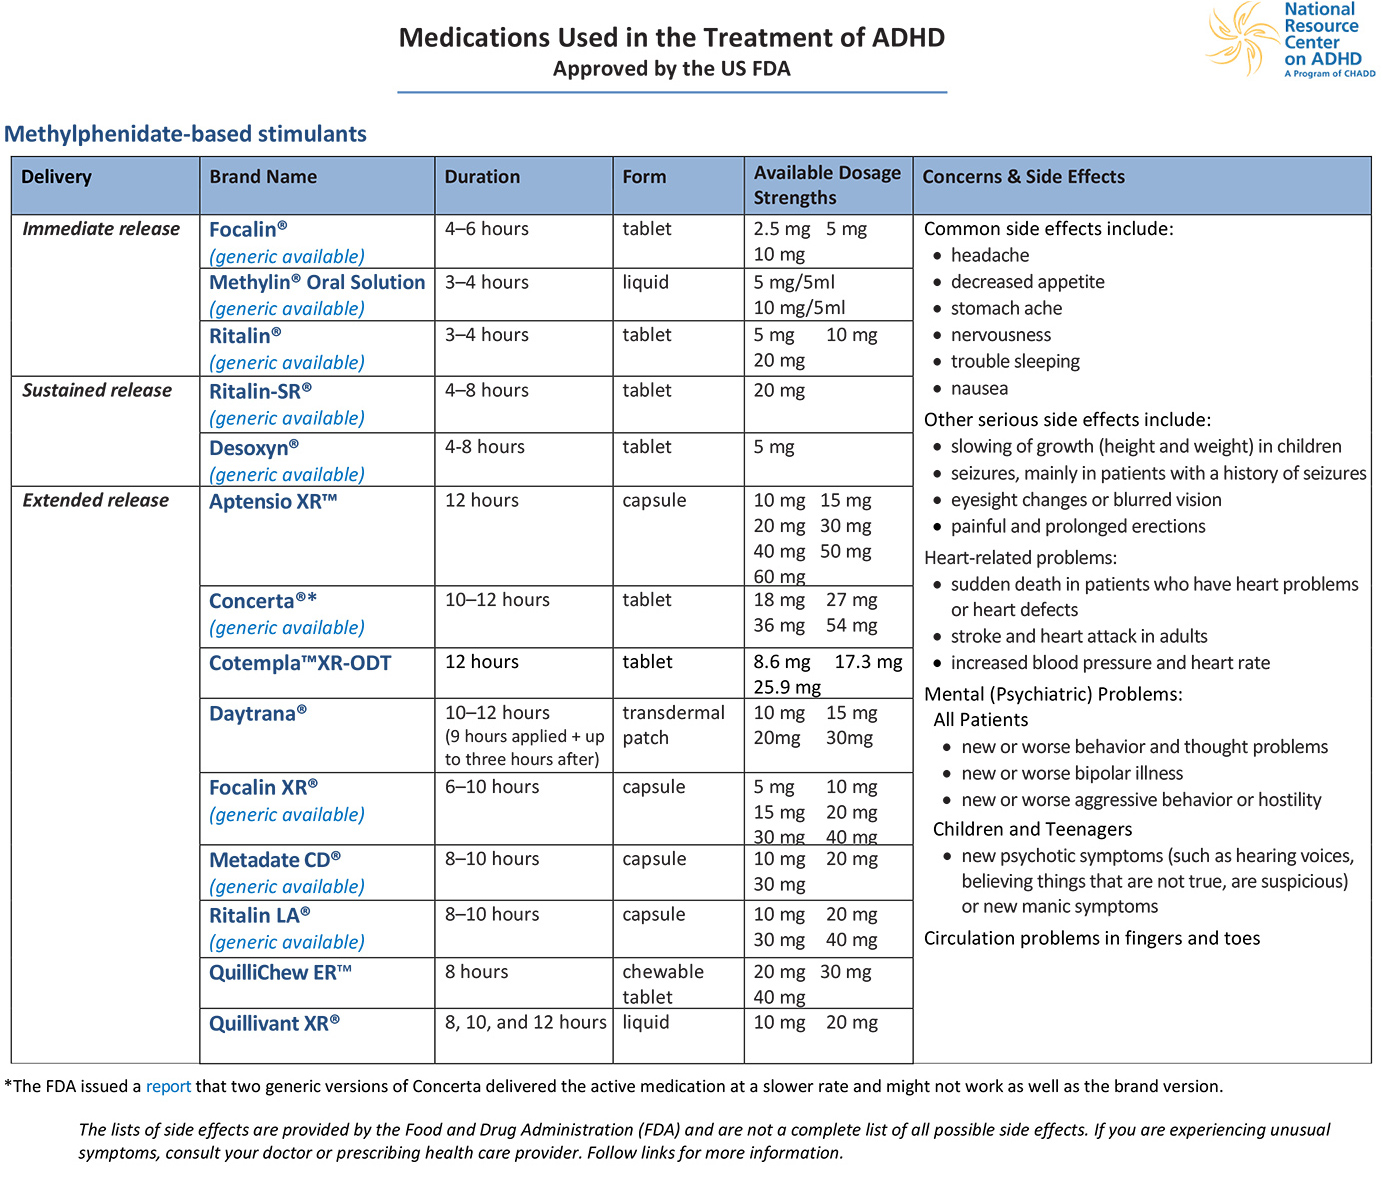 Medications Used in the Treatment of ADHD CHADD